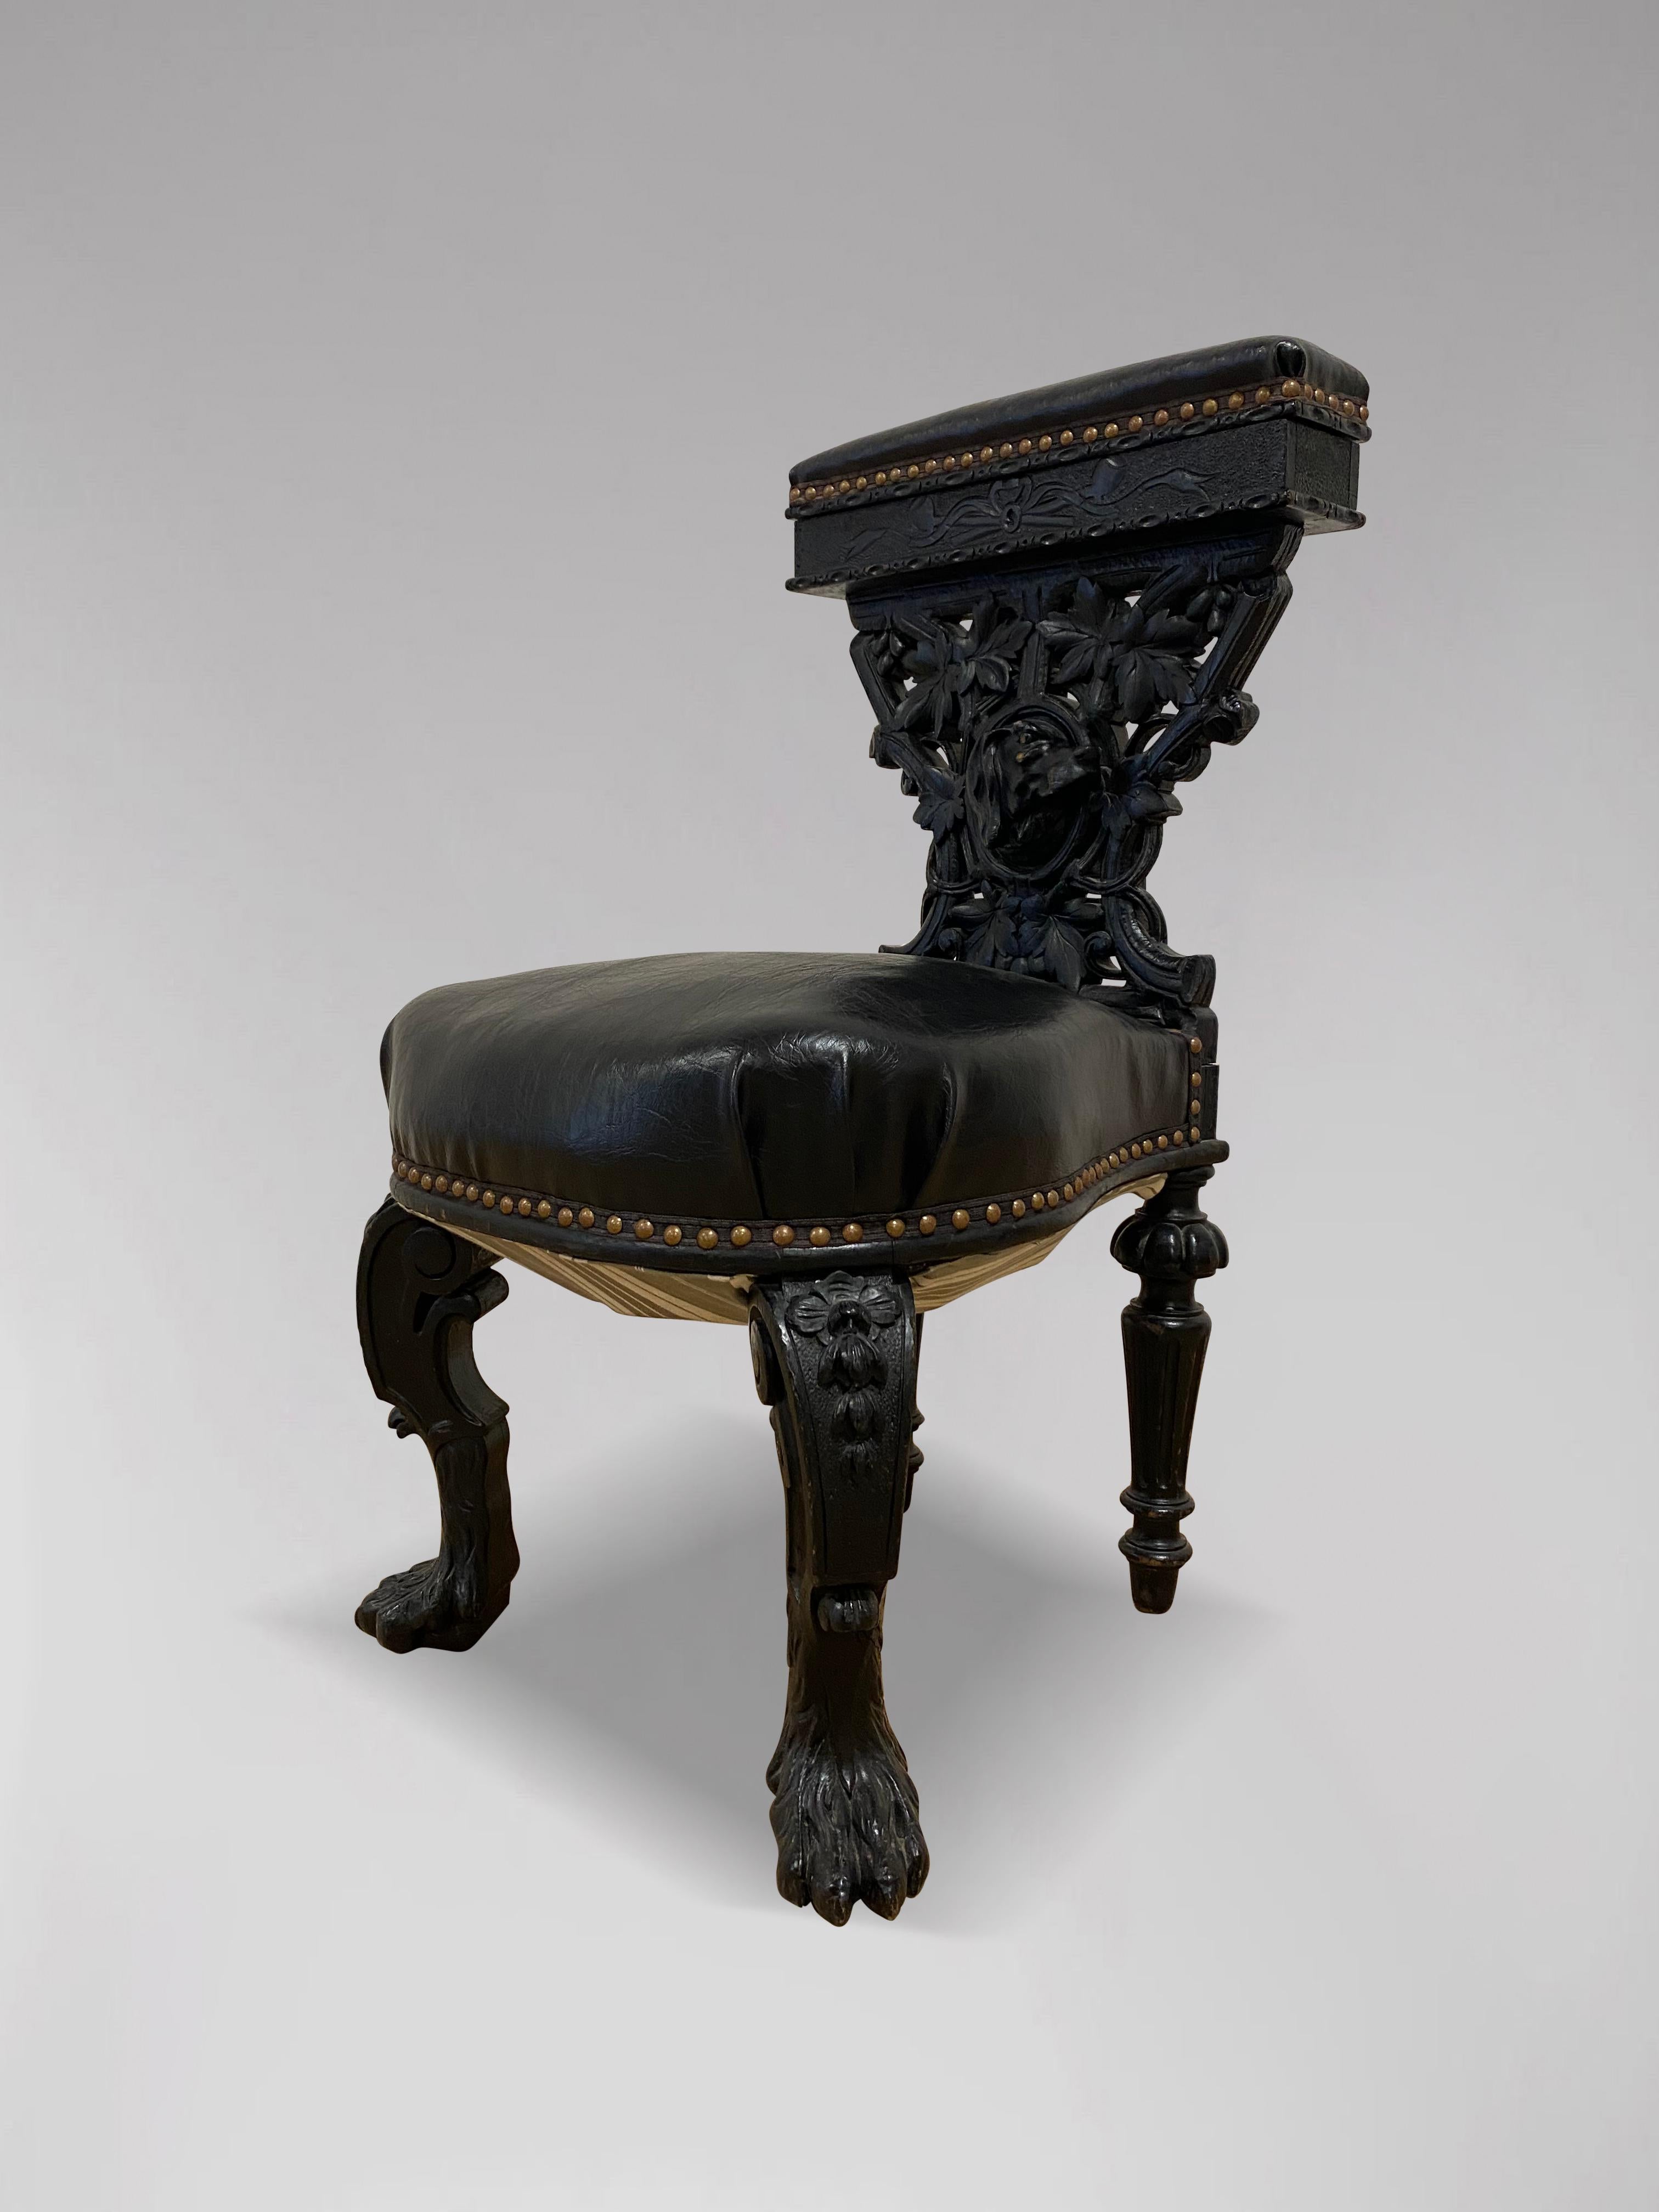 A 19th century French elaborately hand carved ebony cross splat Prie-Dieu or prayer chair. A religious kneeler from the late 19th century, featuring a padded black leather top rail and seat, accented by nailhead tack trim. The exceptionally executed